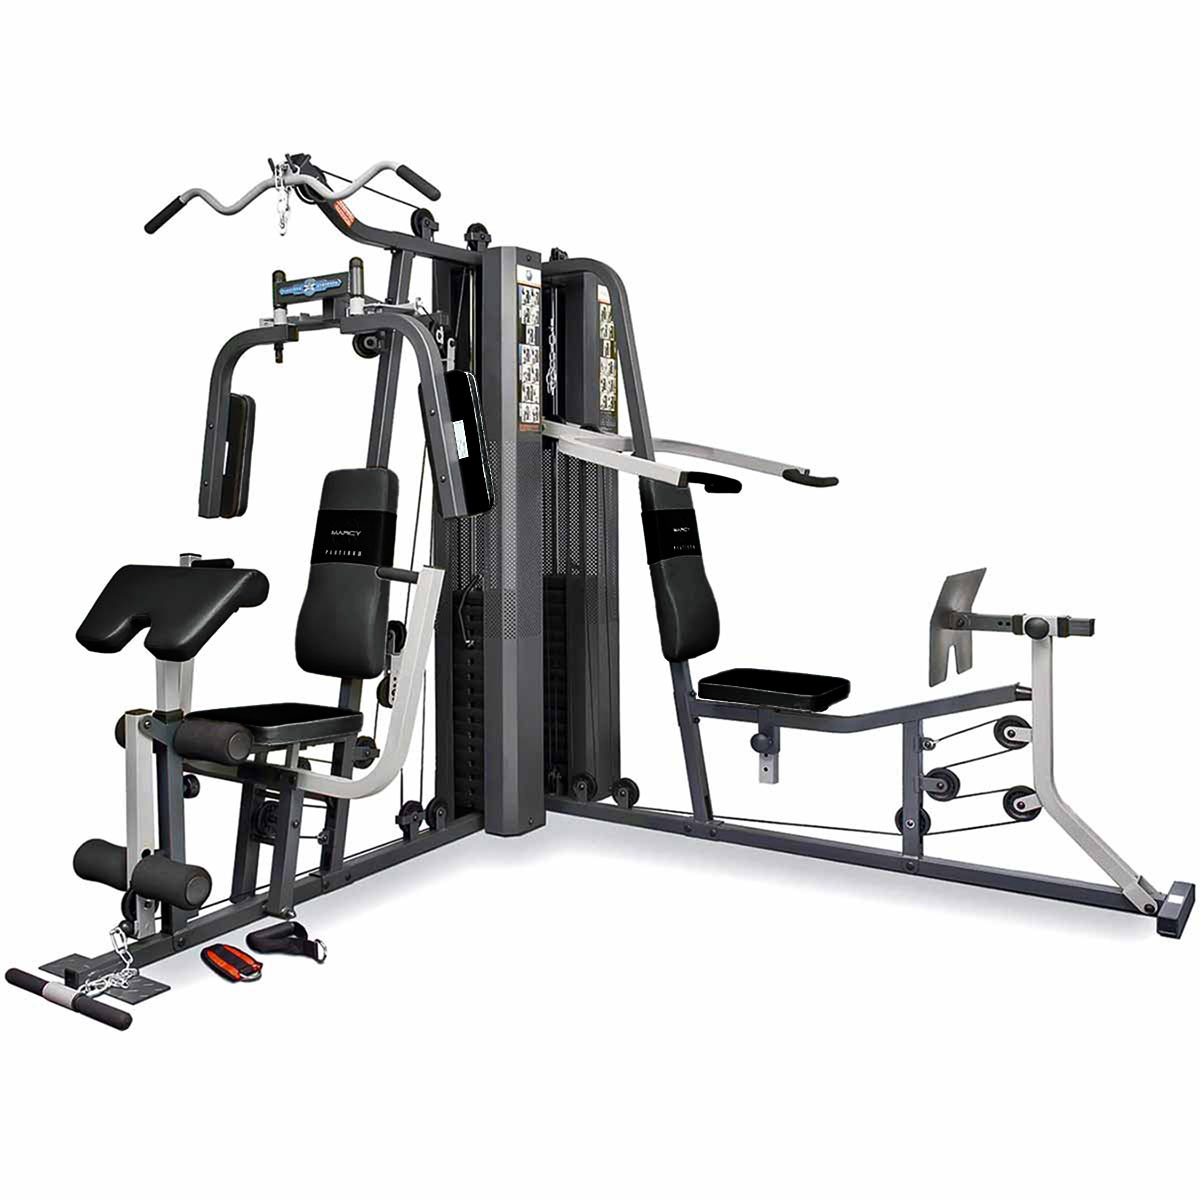 Home Fitness - Home Fitness Equipment